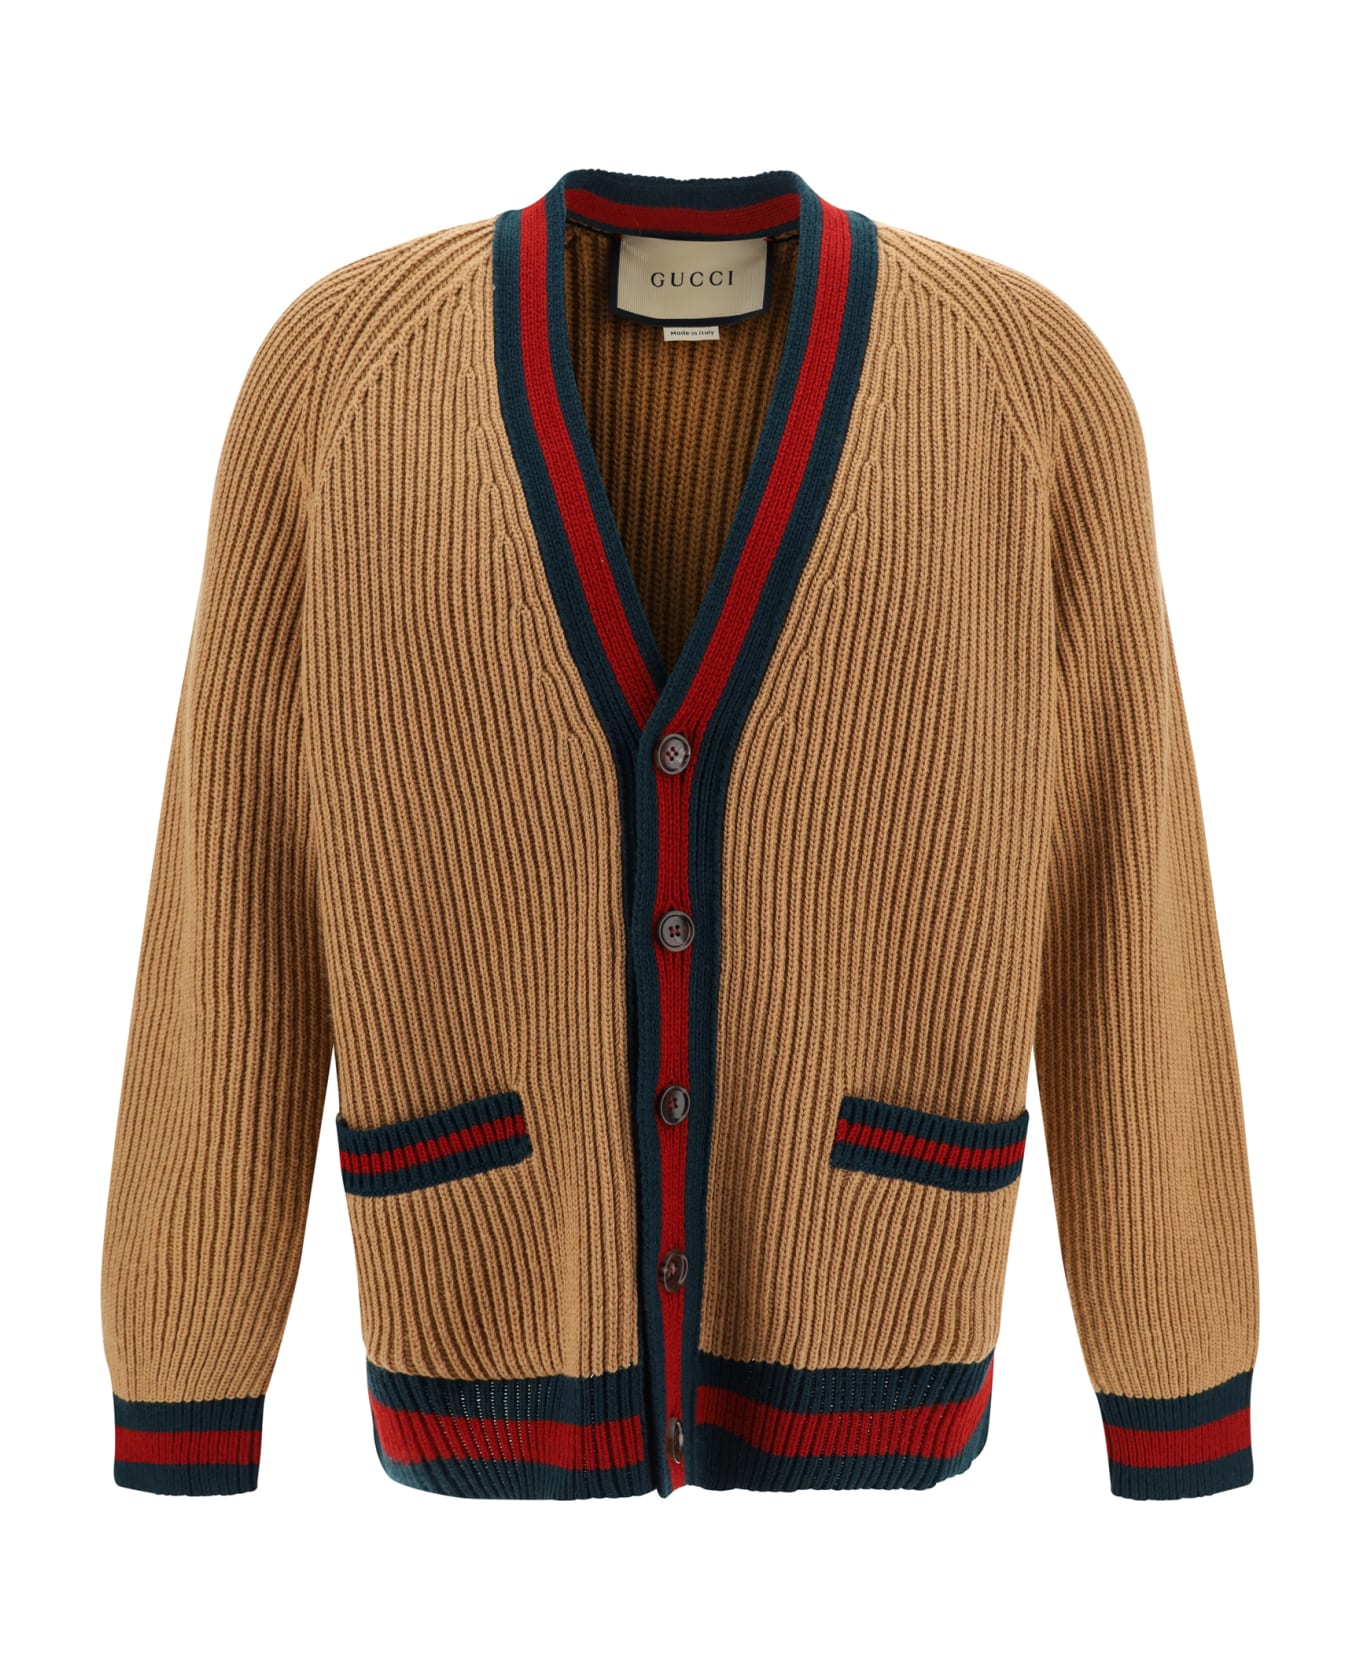 Gucci Cardigan - Camel/green/red